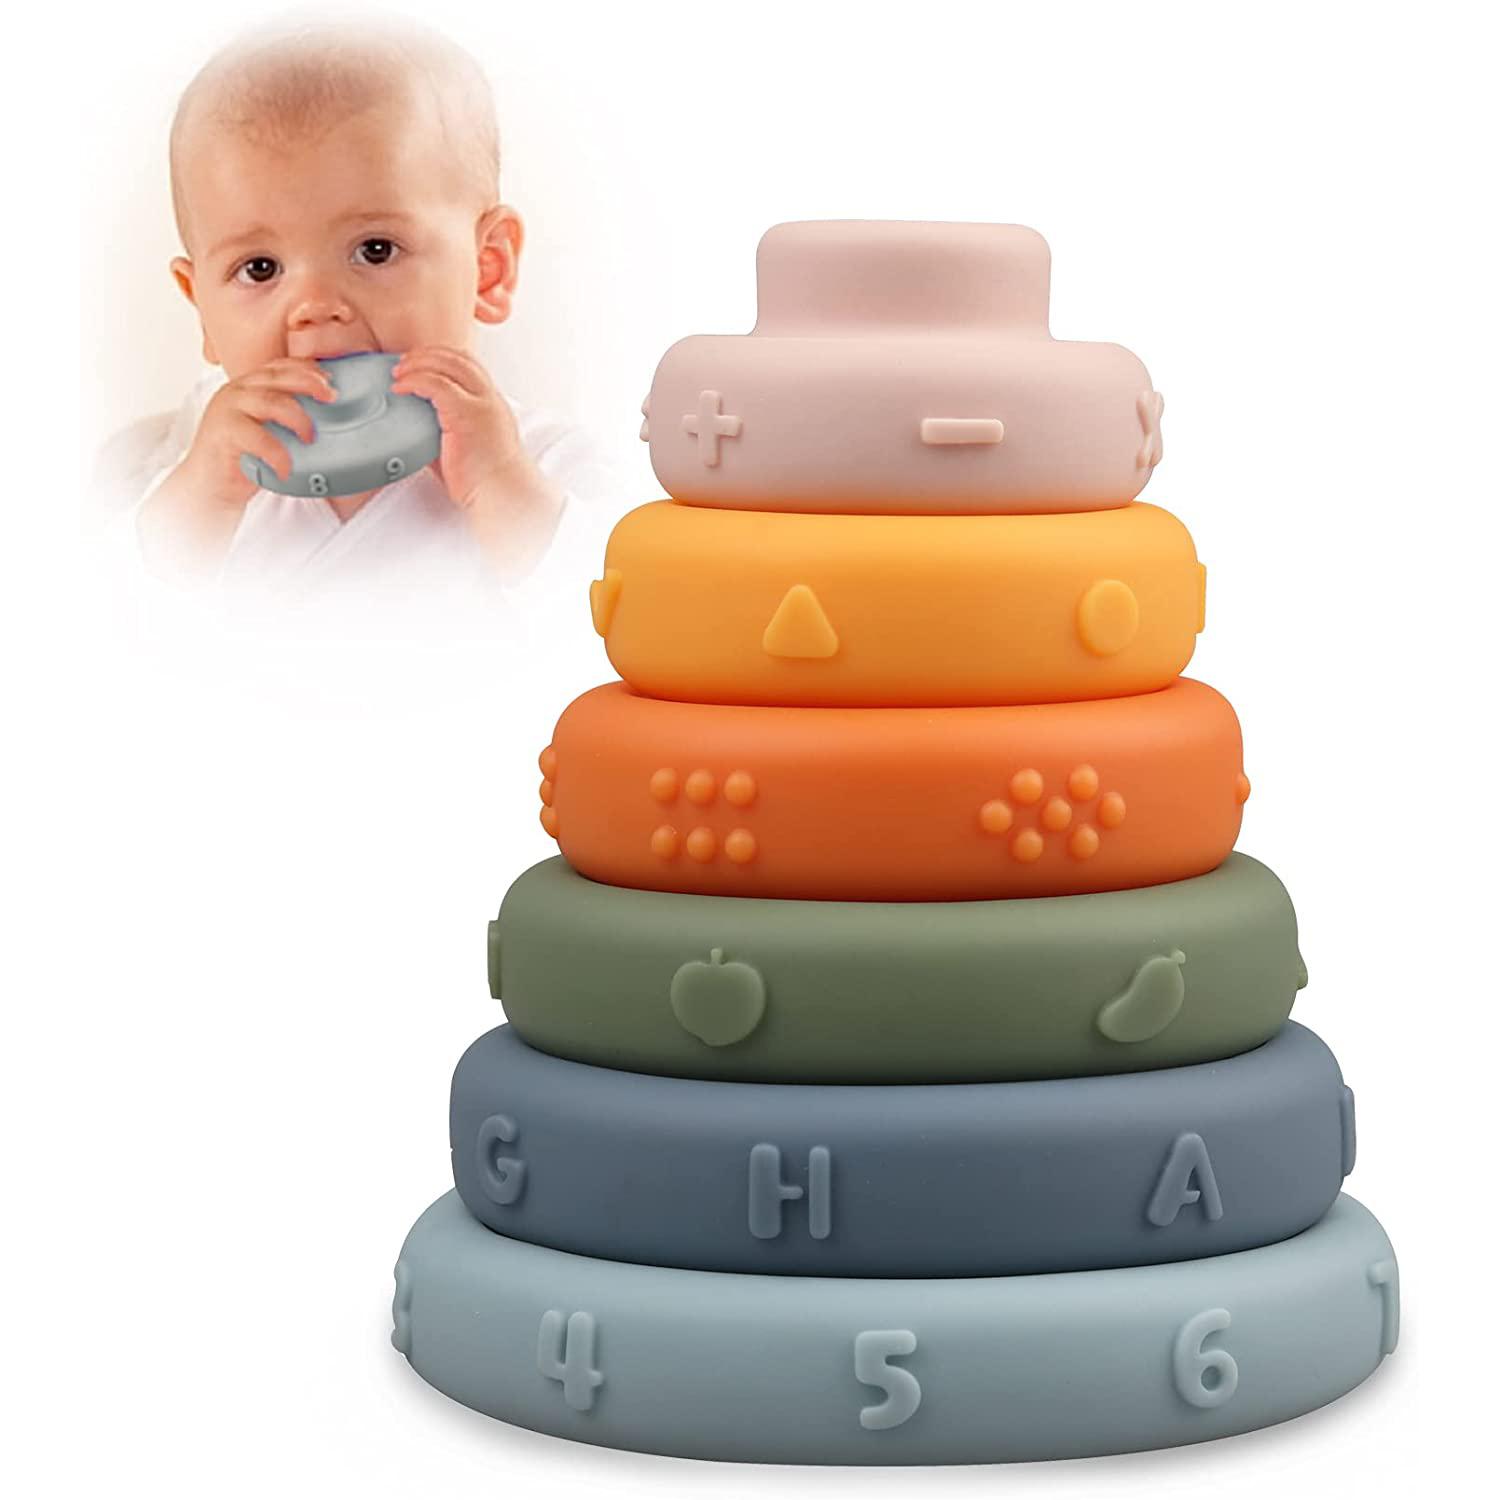 FourAll-Toys, Kids & Baby Baby Stacking Rings - Soft Building Blocks Toys for Toddler - Montessori Sensory Educational Developmental Learning Toy for 6 9 12 18 Month Girls Boys